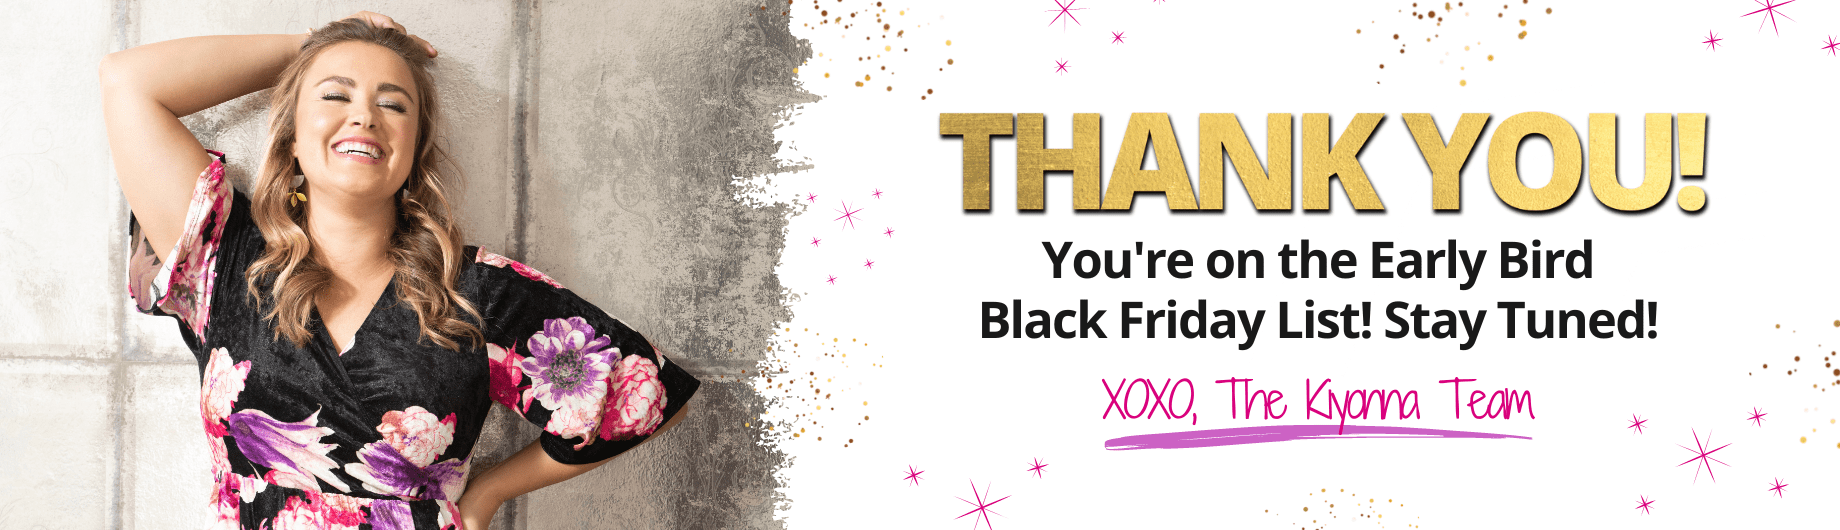 Thank you! You're on the Early Bird Black Friday List